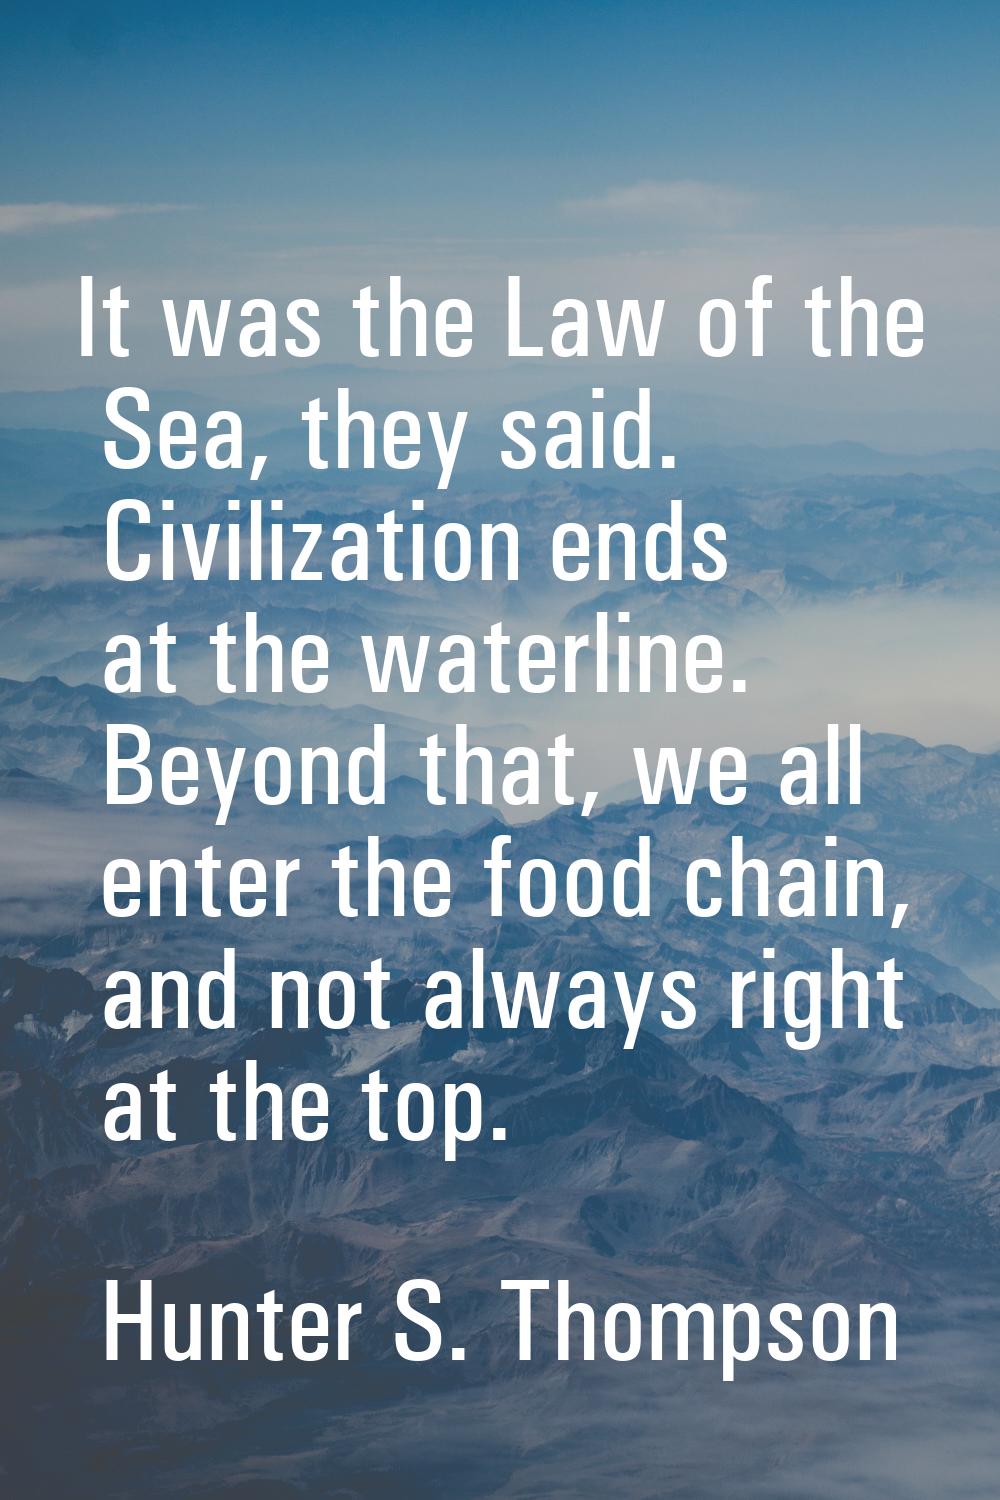 It was the Law of the Sea, they said. Civilization ends at the waterline. Beyond that, we all enter